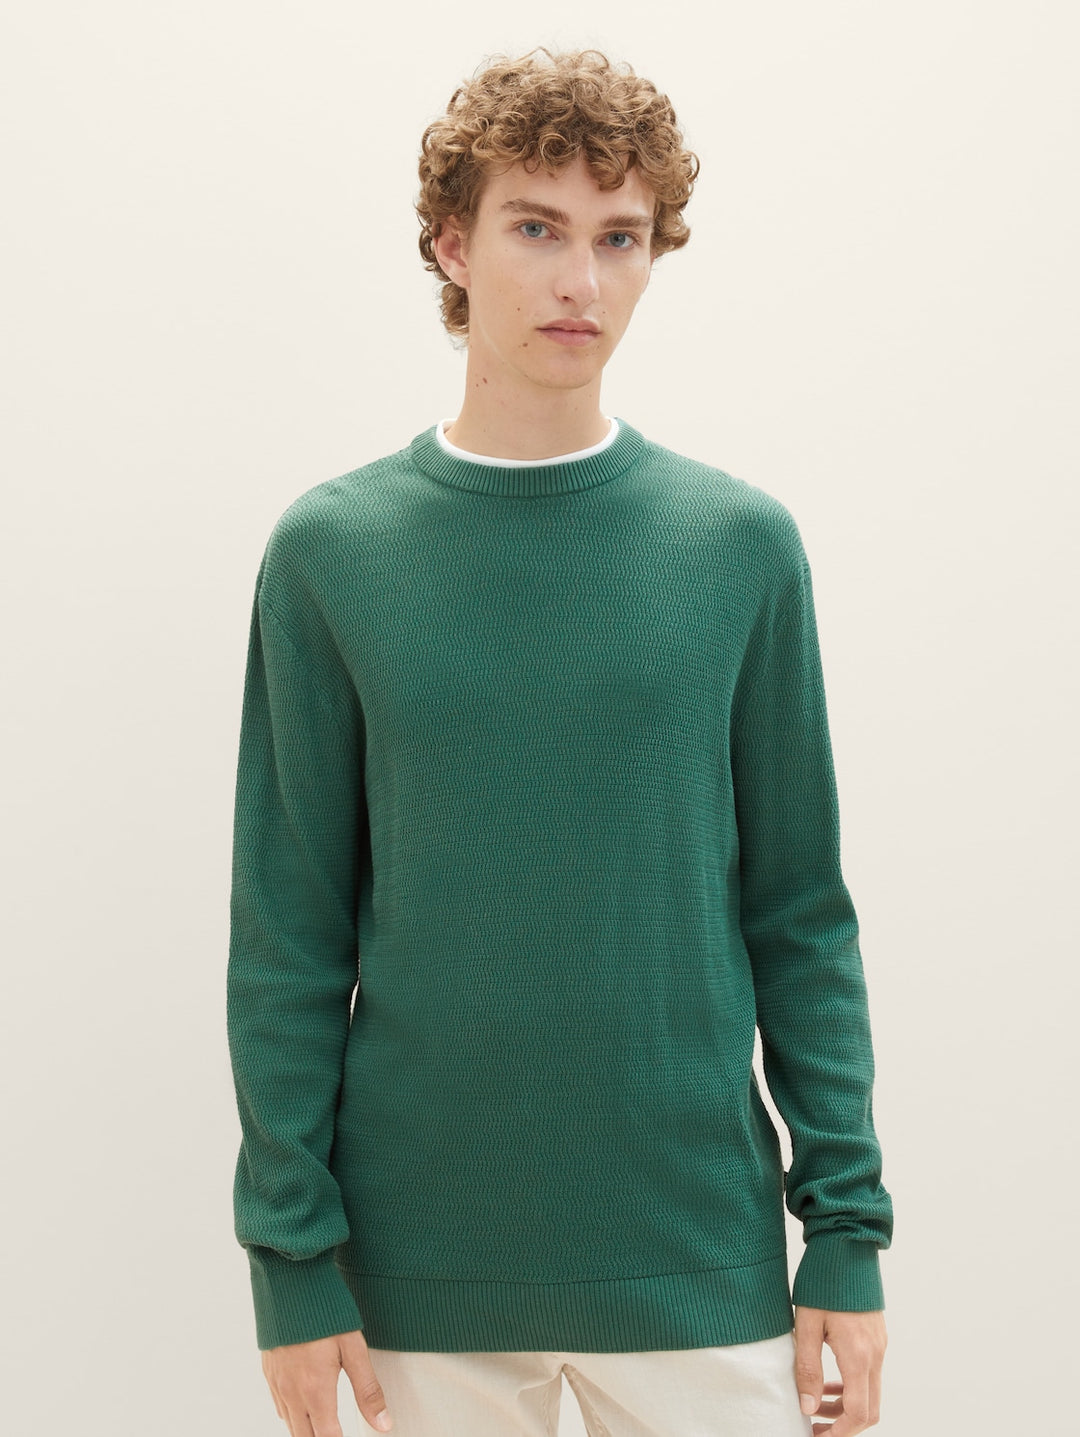 STRUCTURED DOUBLELAYER KNIT